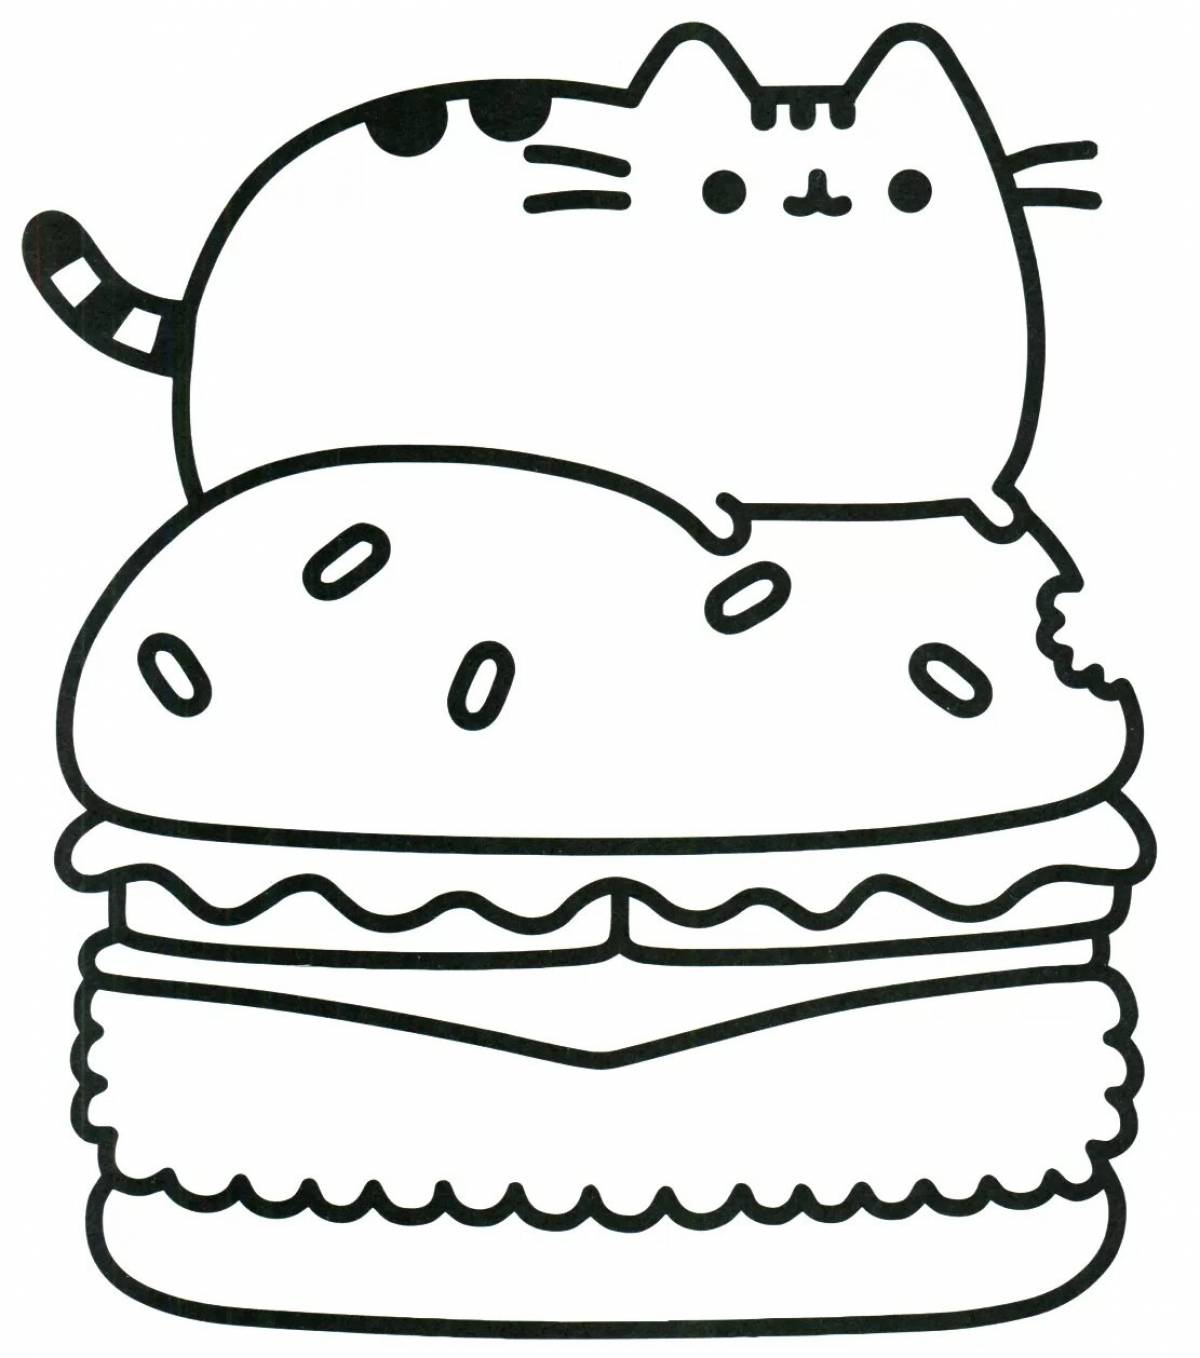 Naughty cat pusheen coloring page